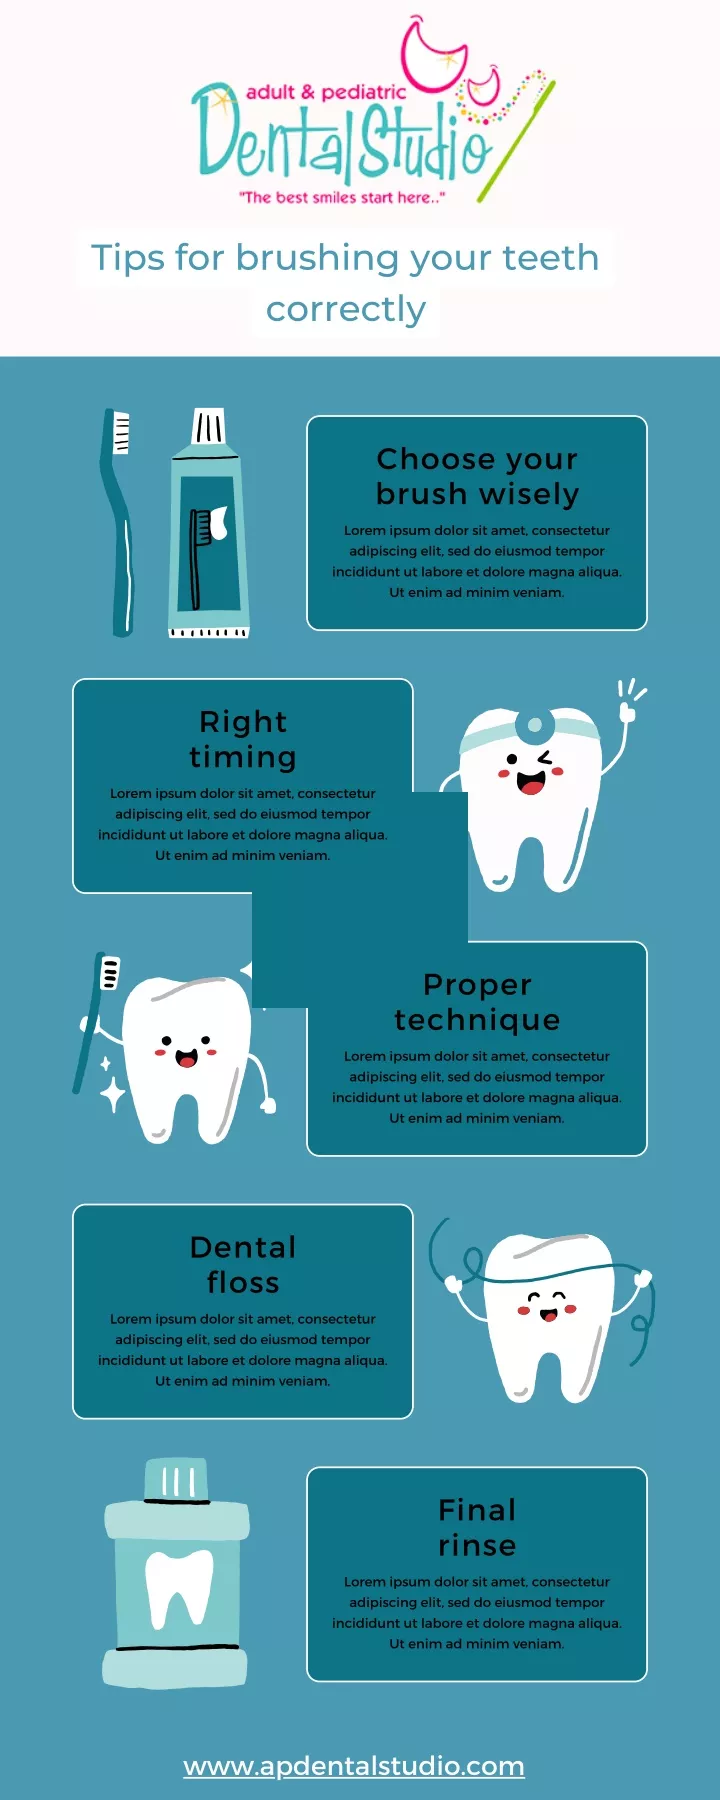 tips for brushing your teeth correctly